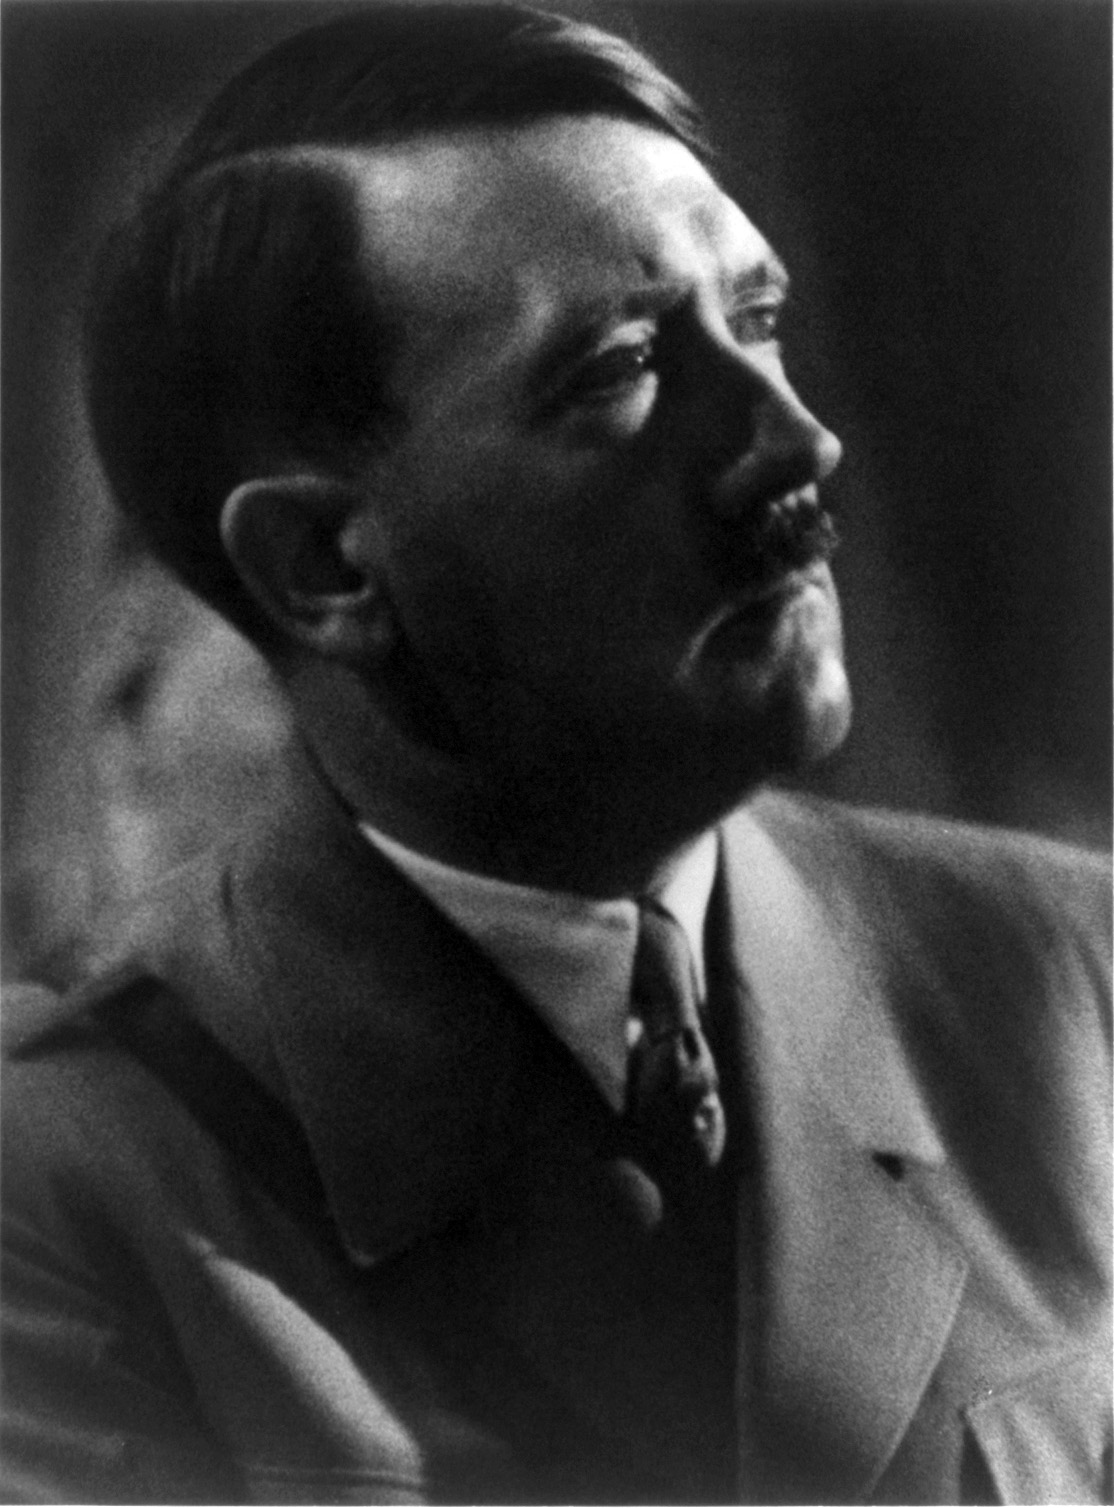 Adolf Hitler Research Paper